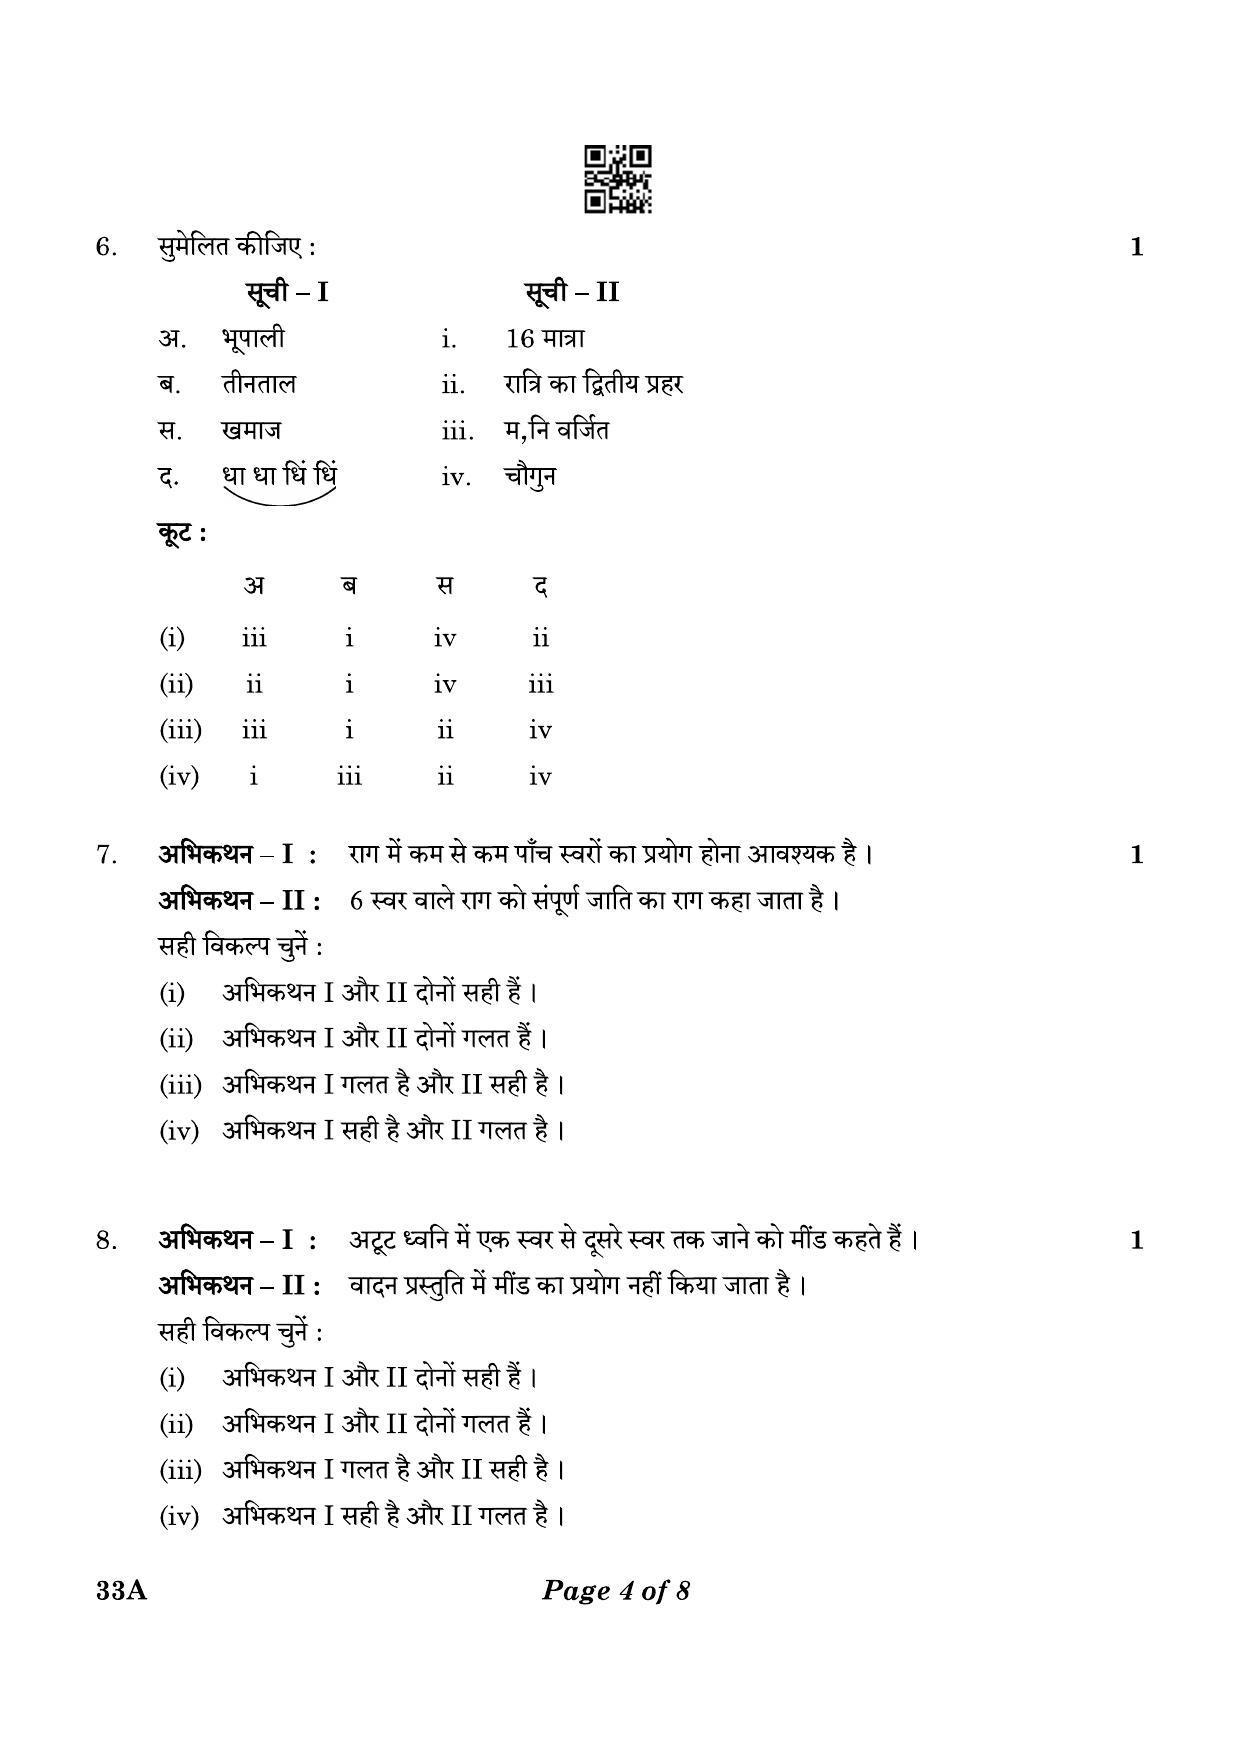 CBSE Class 10 33A Hindustani Music (MI) 2023 Question Paper - Page 4